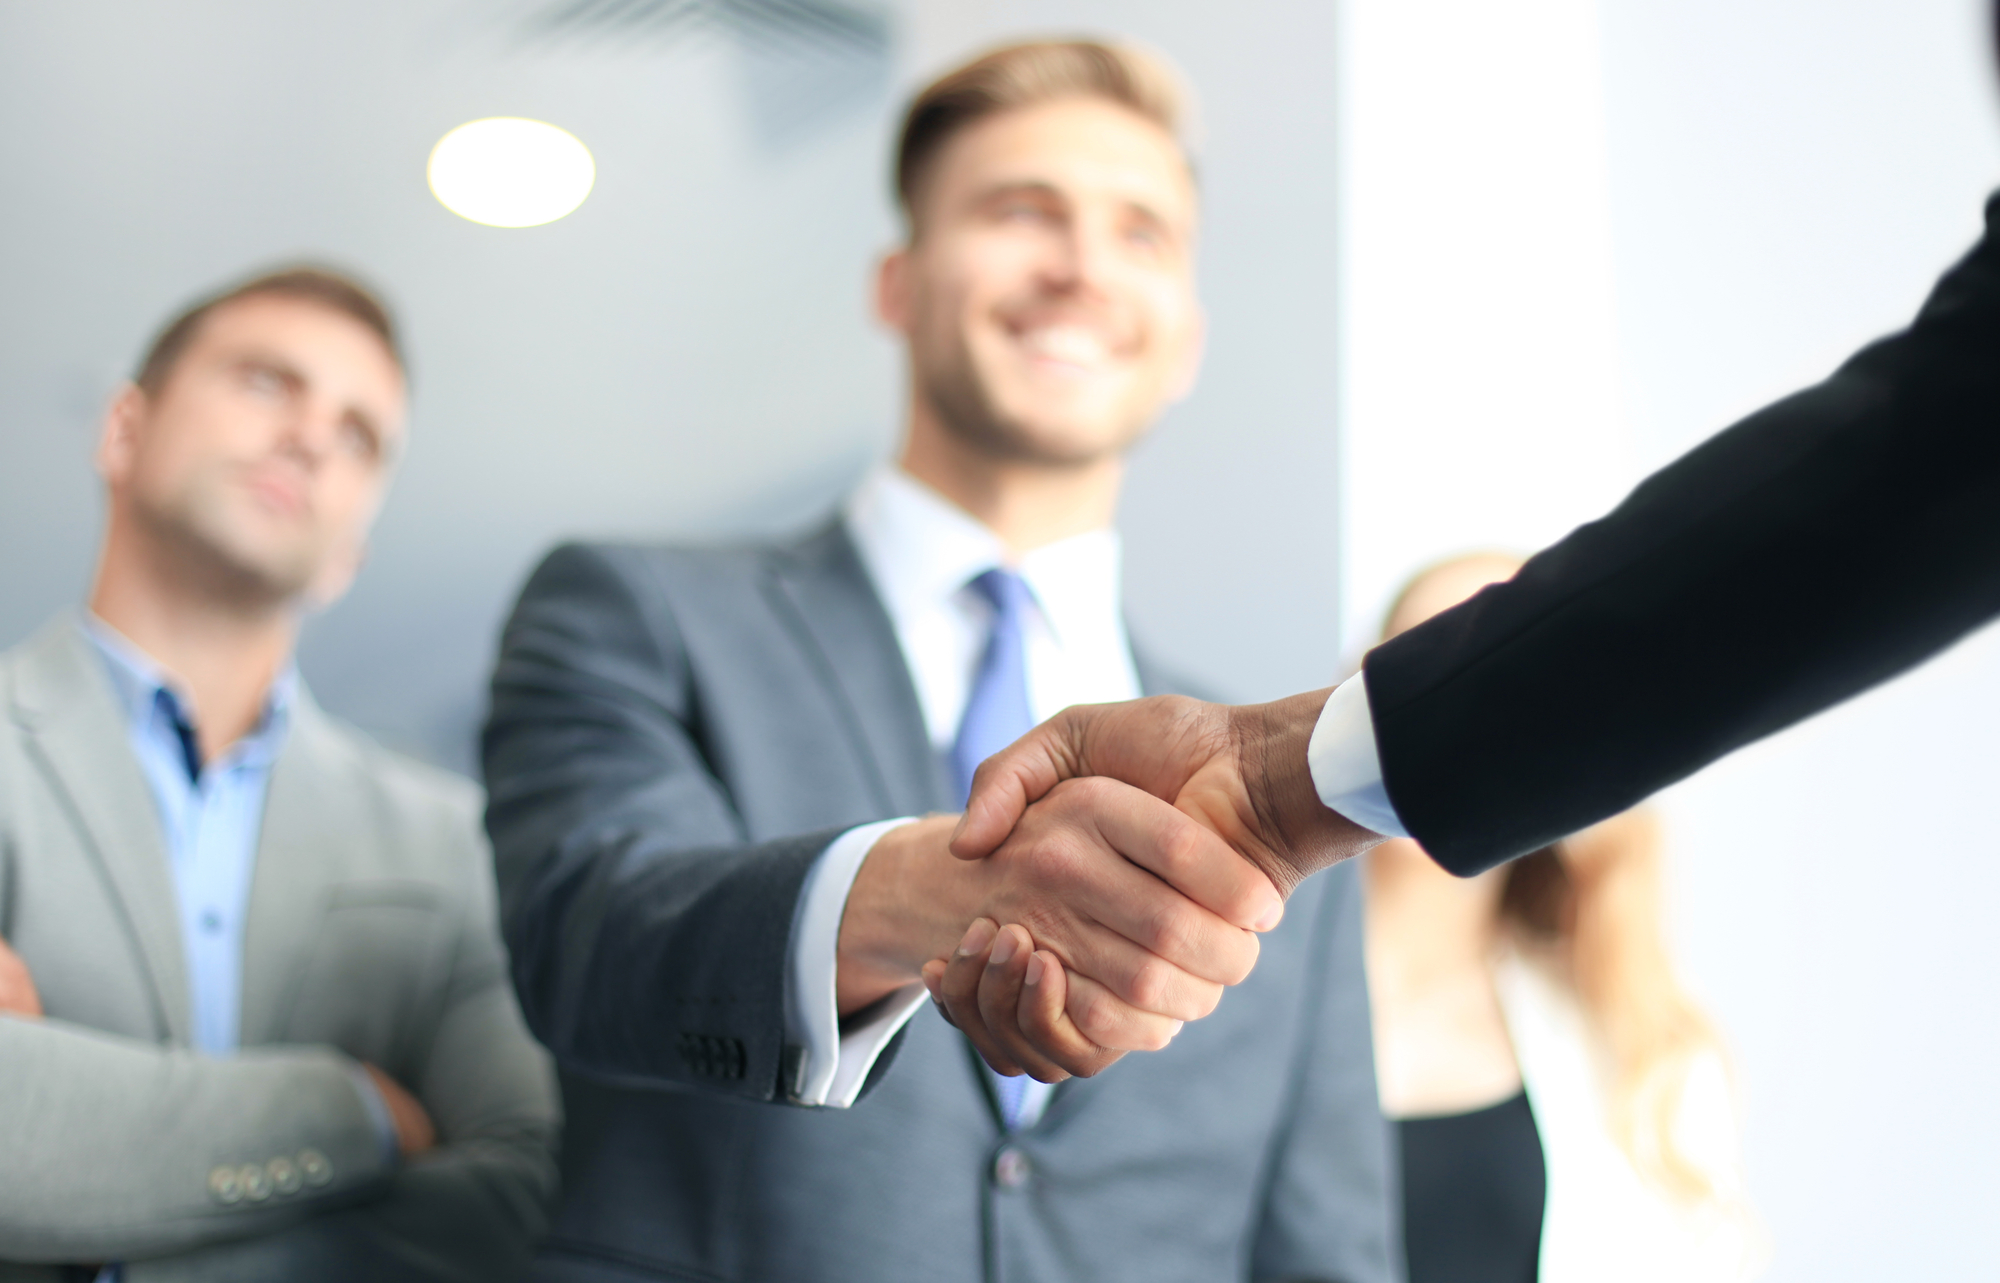  Business People Shake Hands